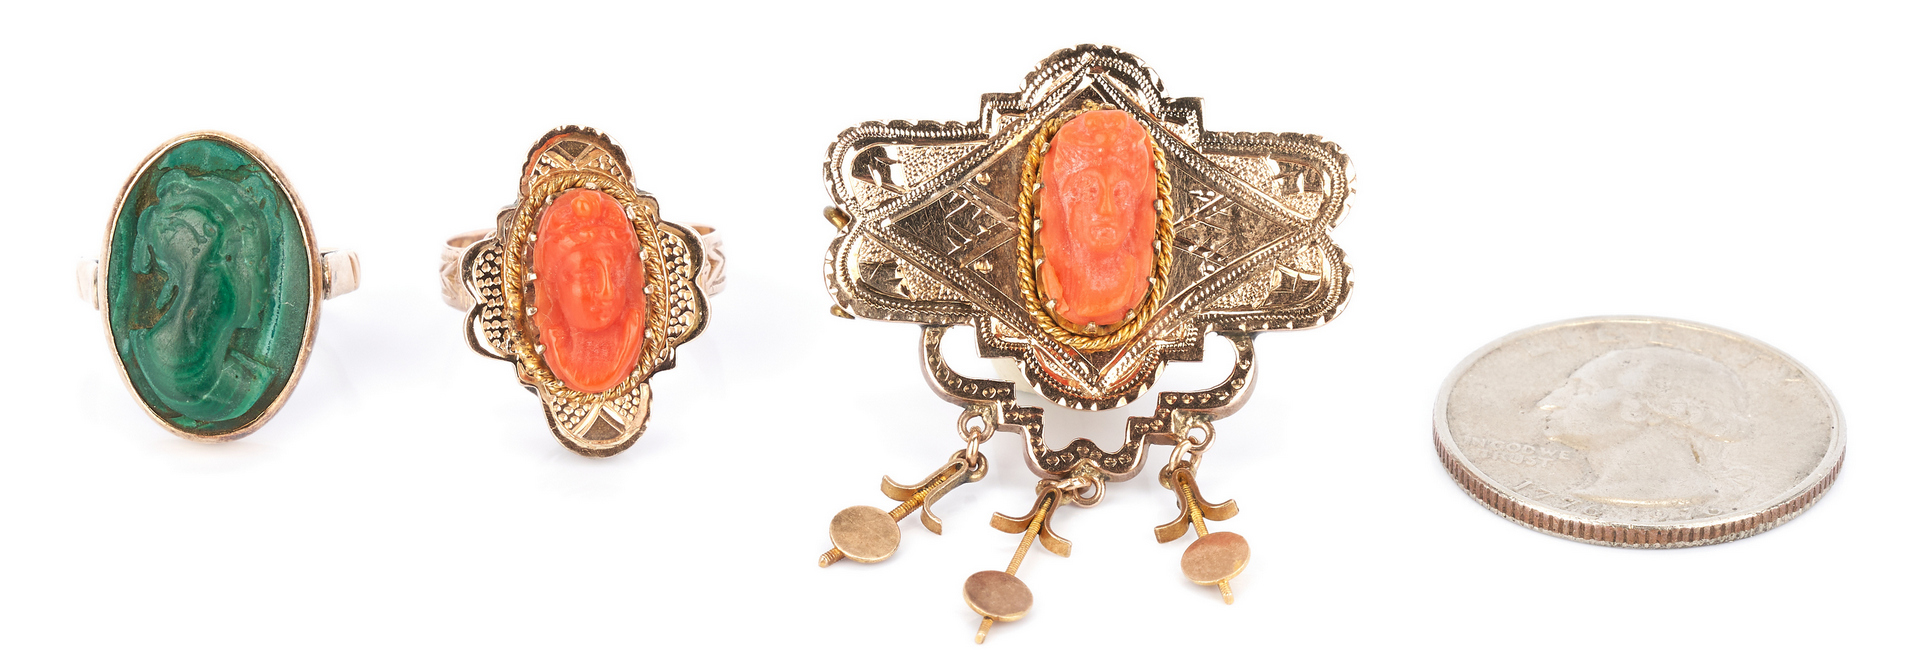 Lot 1041: 2 Ladies 10K Rings and 1 Brooch with Cameos